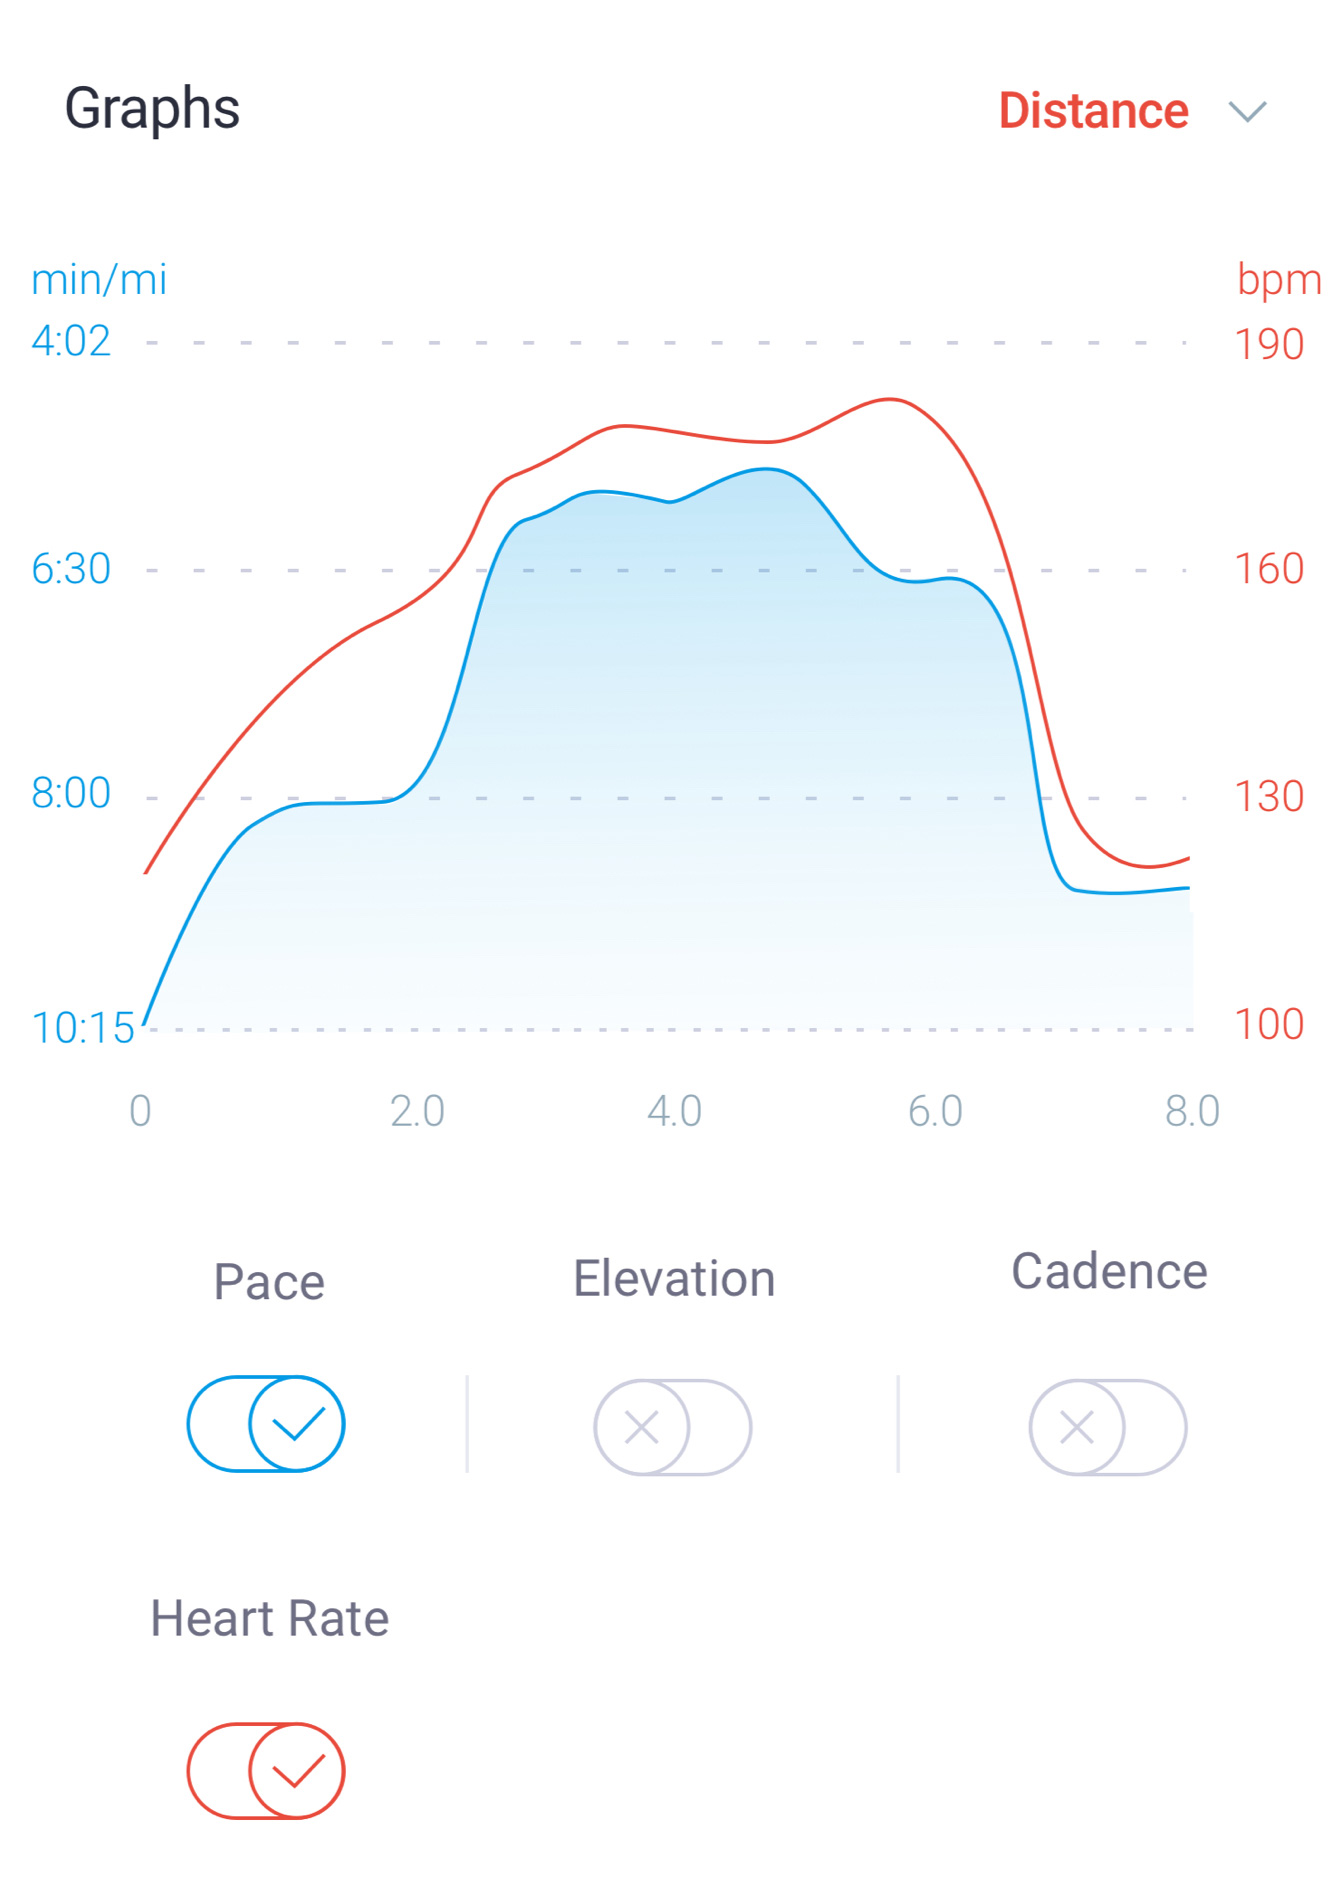 Graph of pace, elevation, cadence and heart rate data